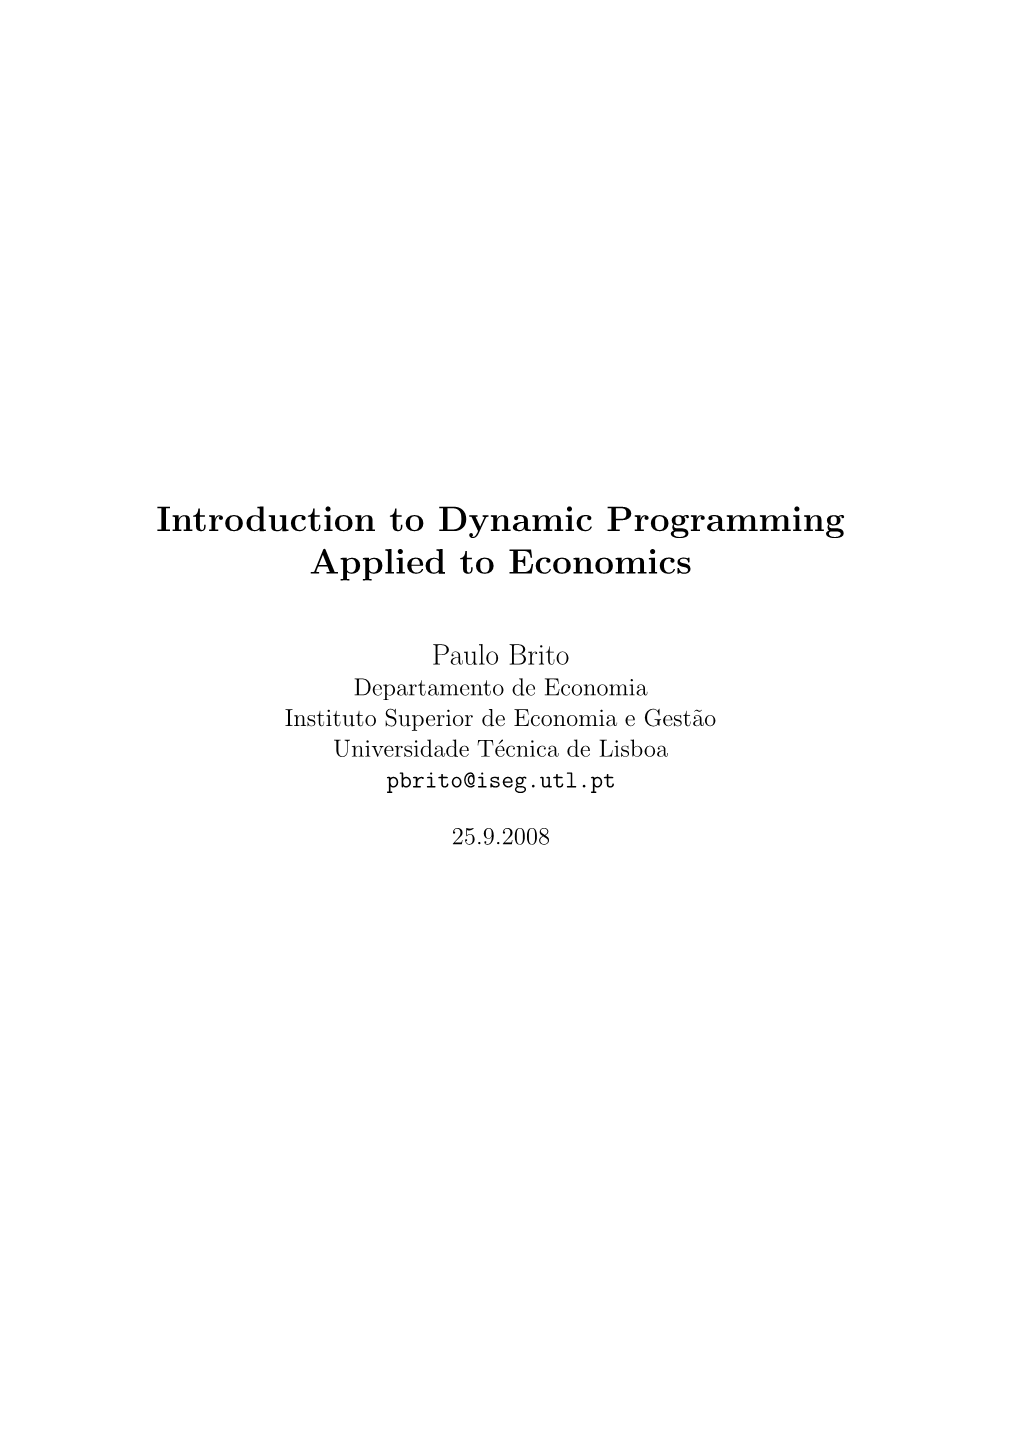 Introduction to Dynamic Programming Applied to Economics